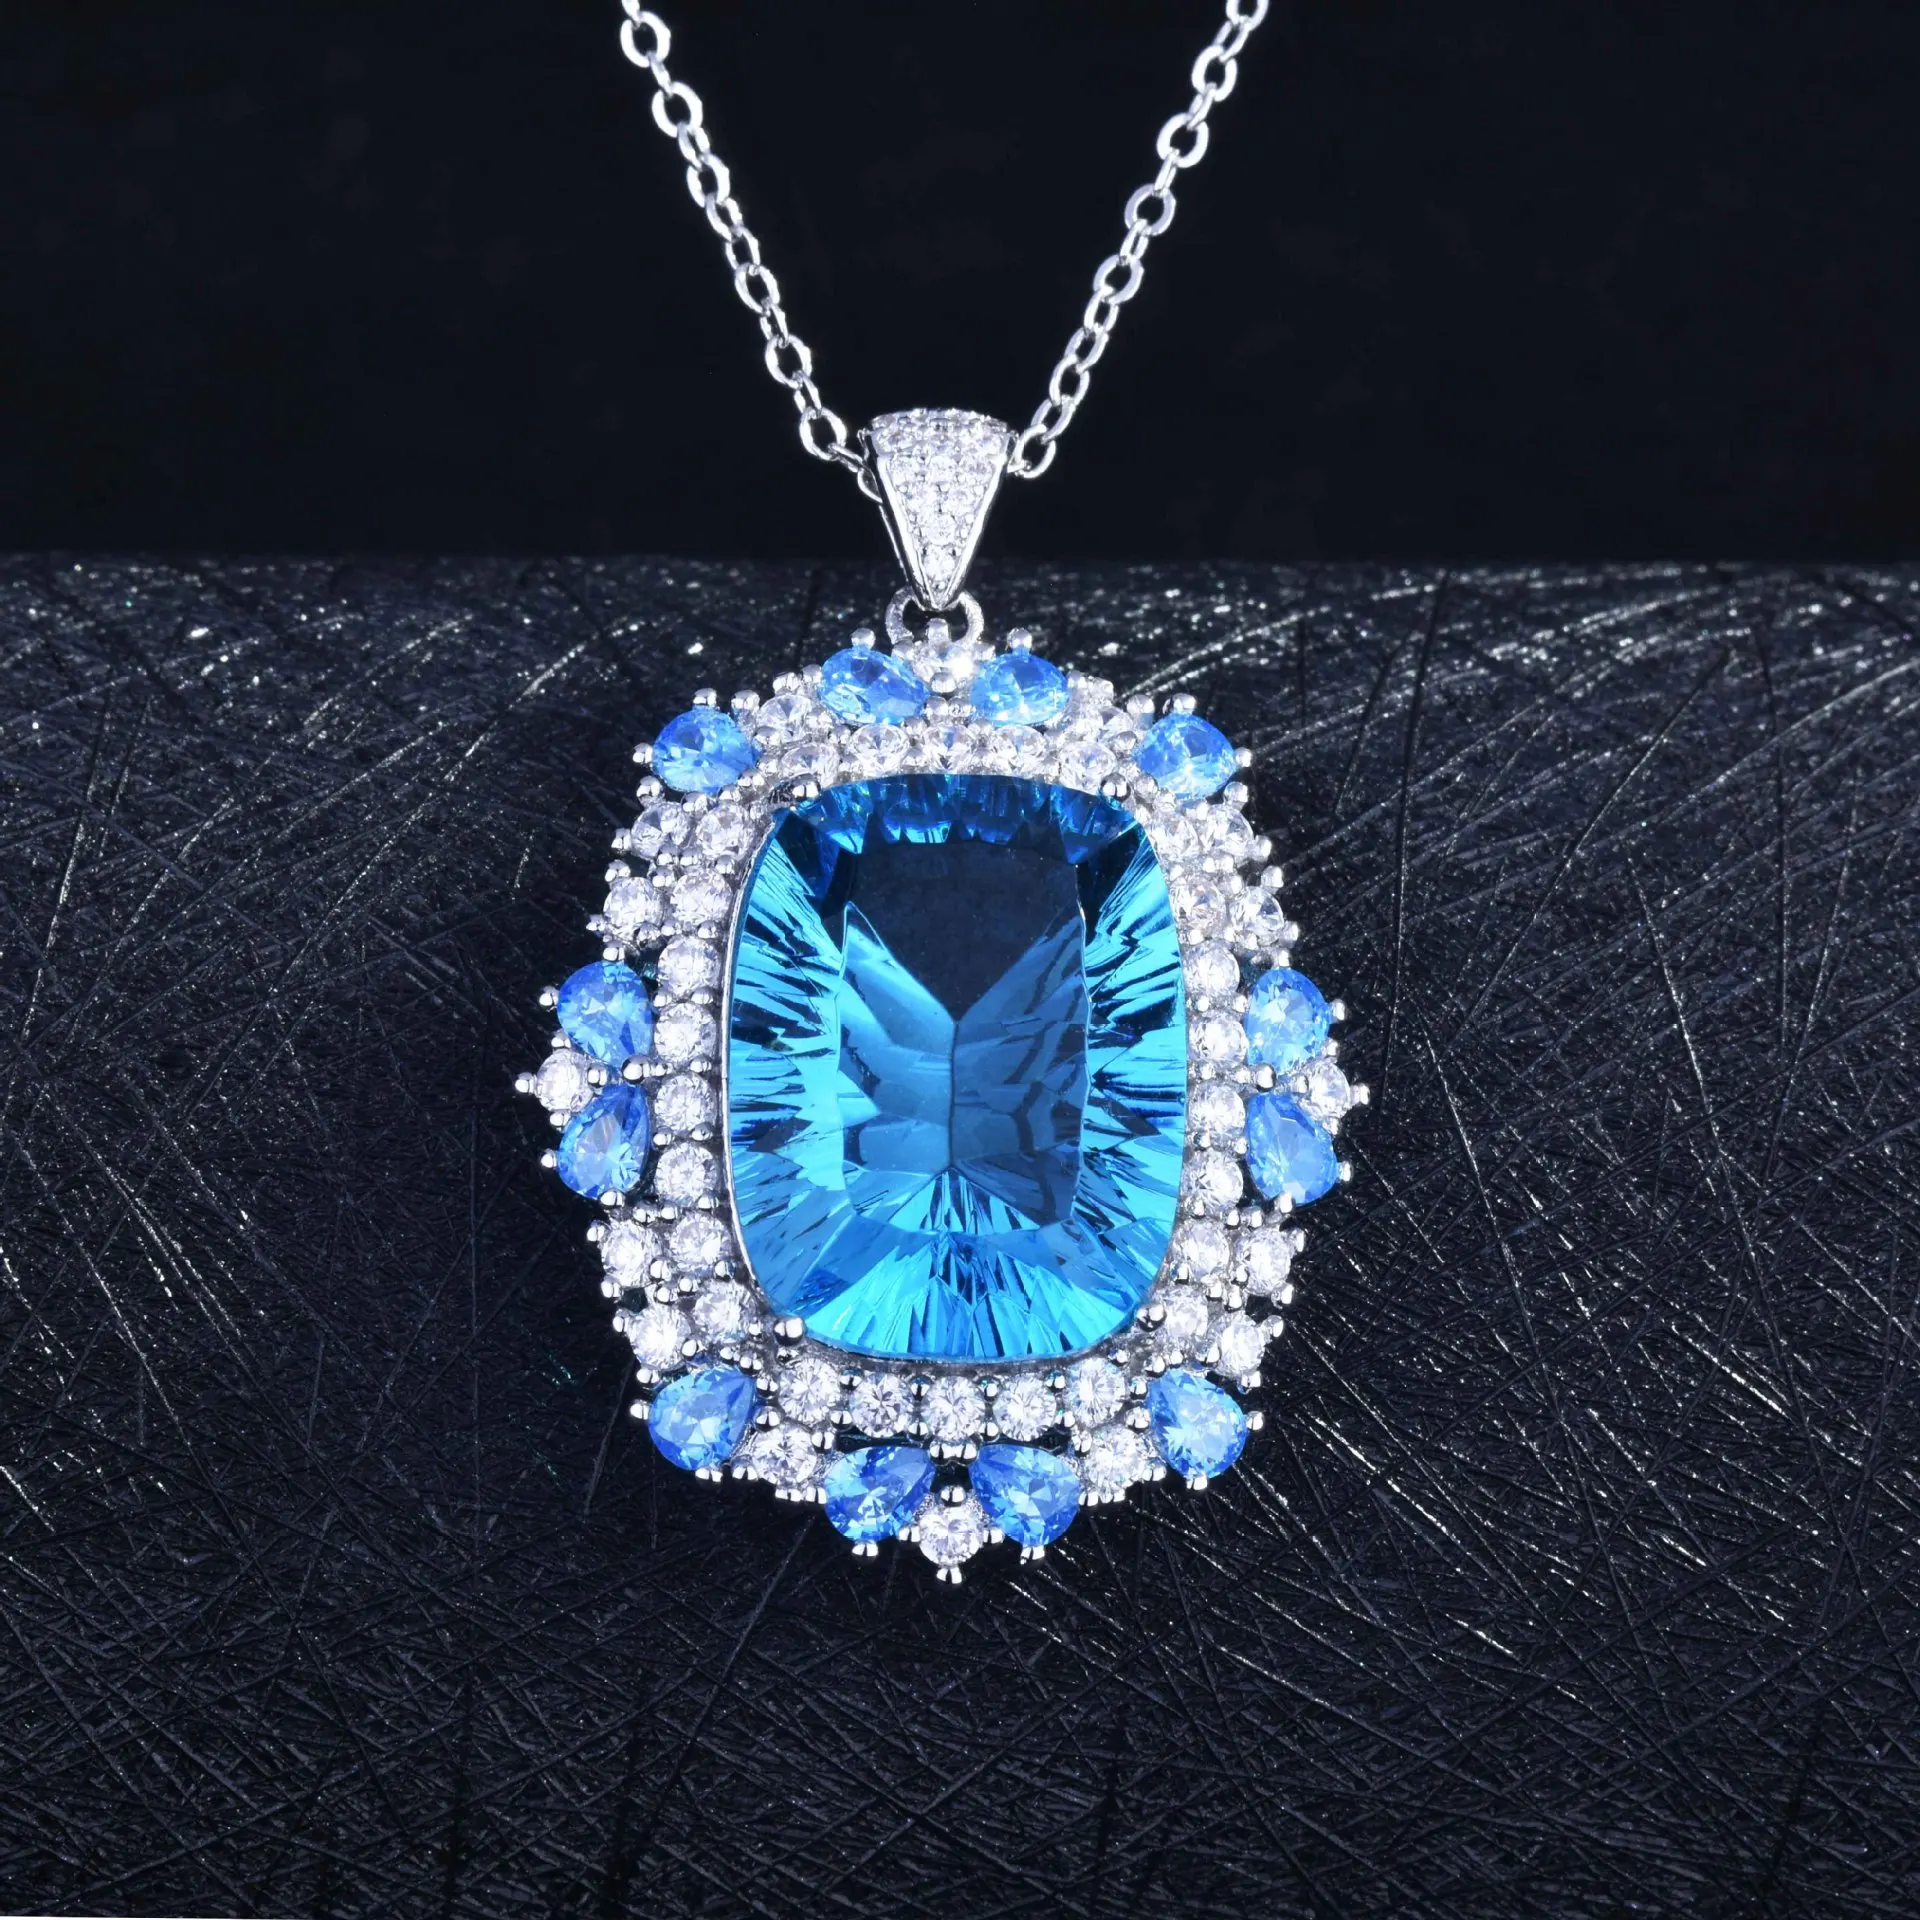 

DIWENFU 925 Sterling Silver 45cm Necklace Sapphire Pendant Jewelry Square Party Bohemia Collares Mujer Silver 925 Jewelry Female